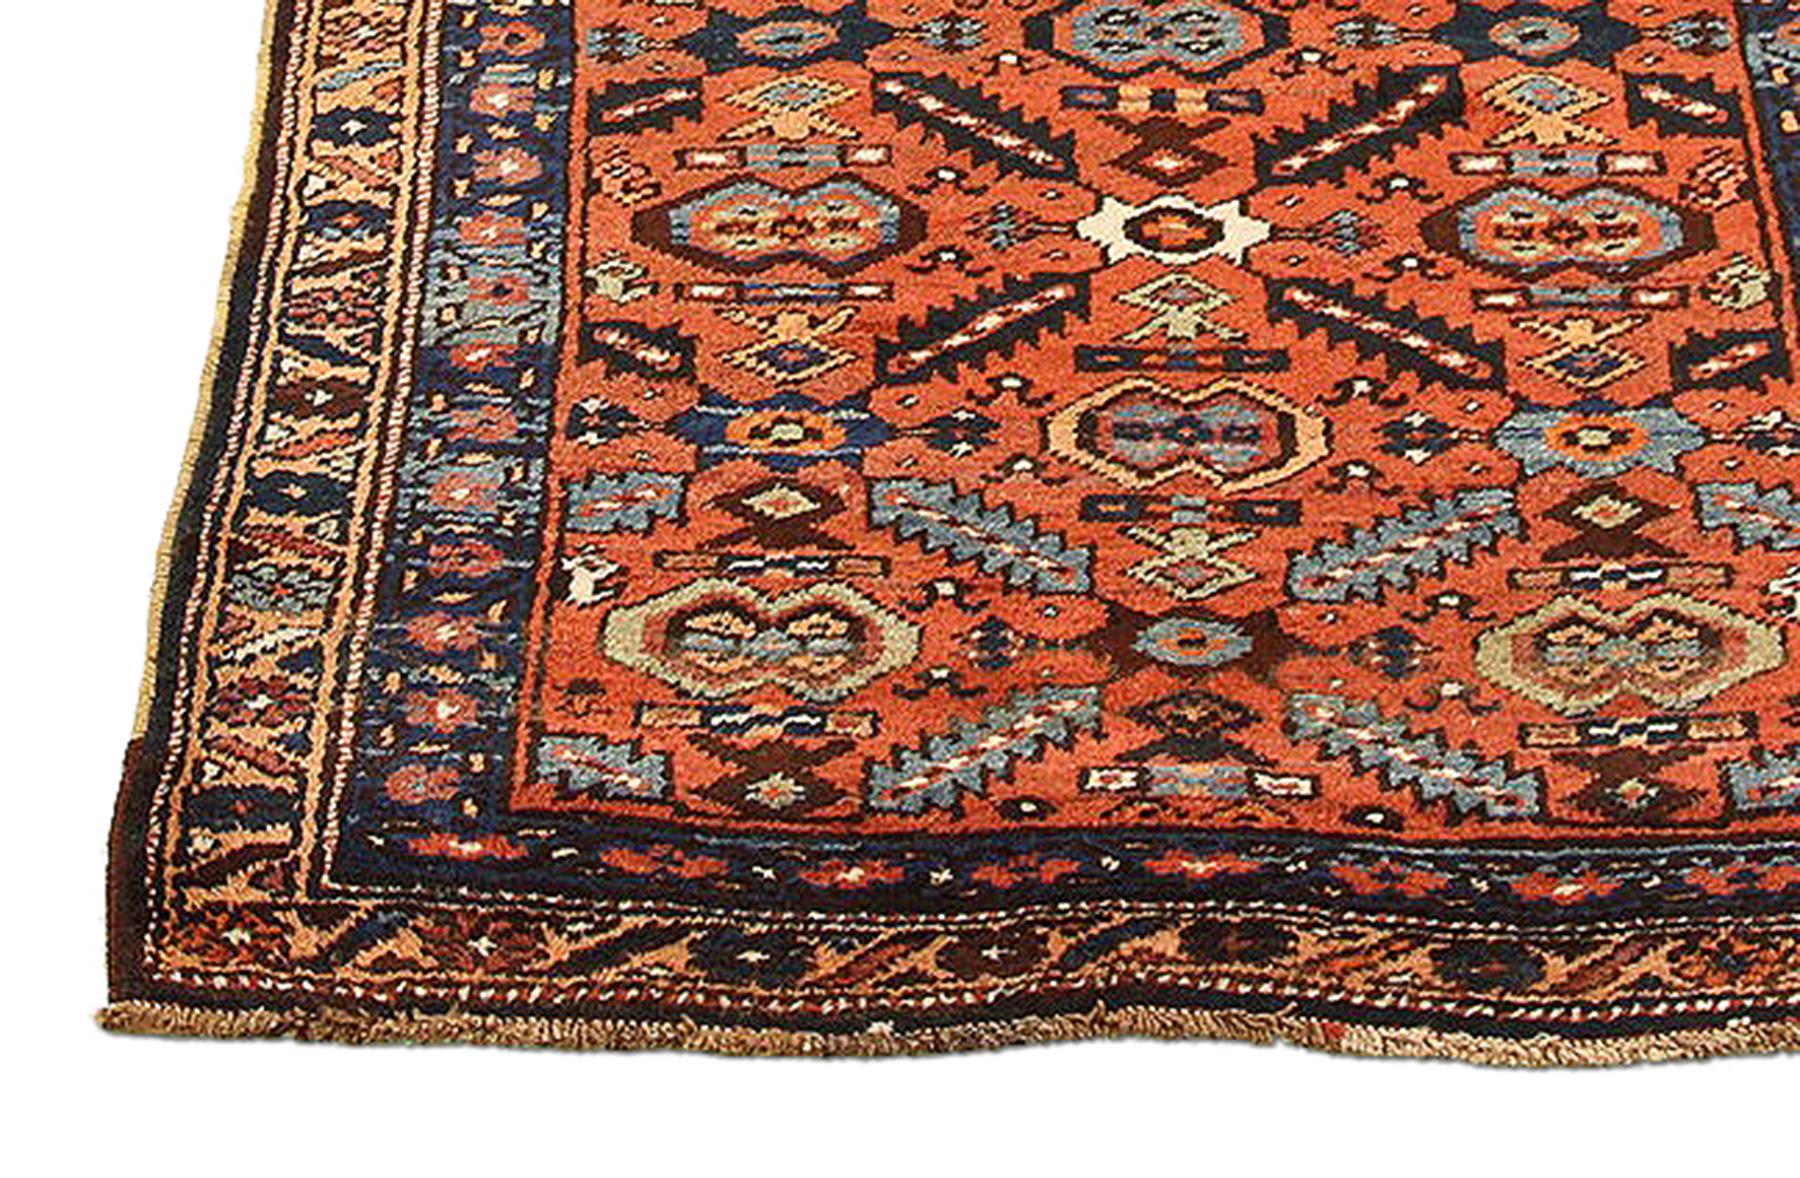 Antique Persian runner rug handwoven from the finest sheep’s wool and colored with all-natural vegetable dyes that are safe for humans and pets. It’s a traditional Bijar design featuring blue, navy, and white flower medallion details over a red